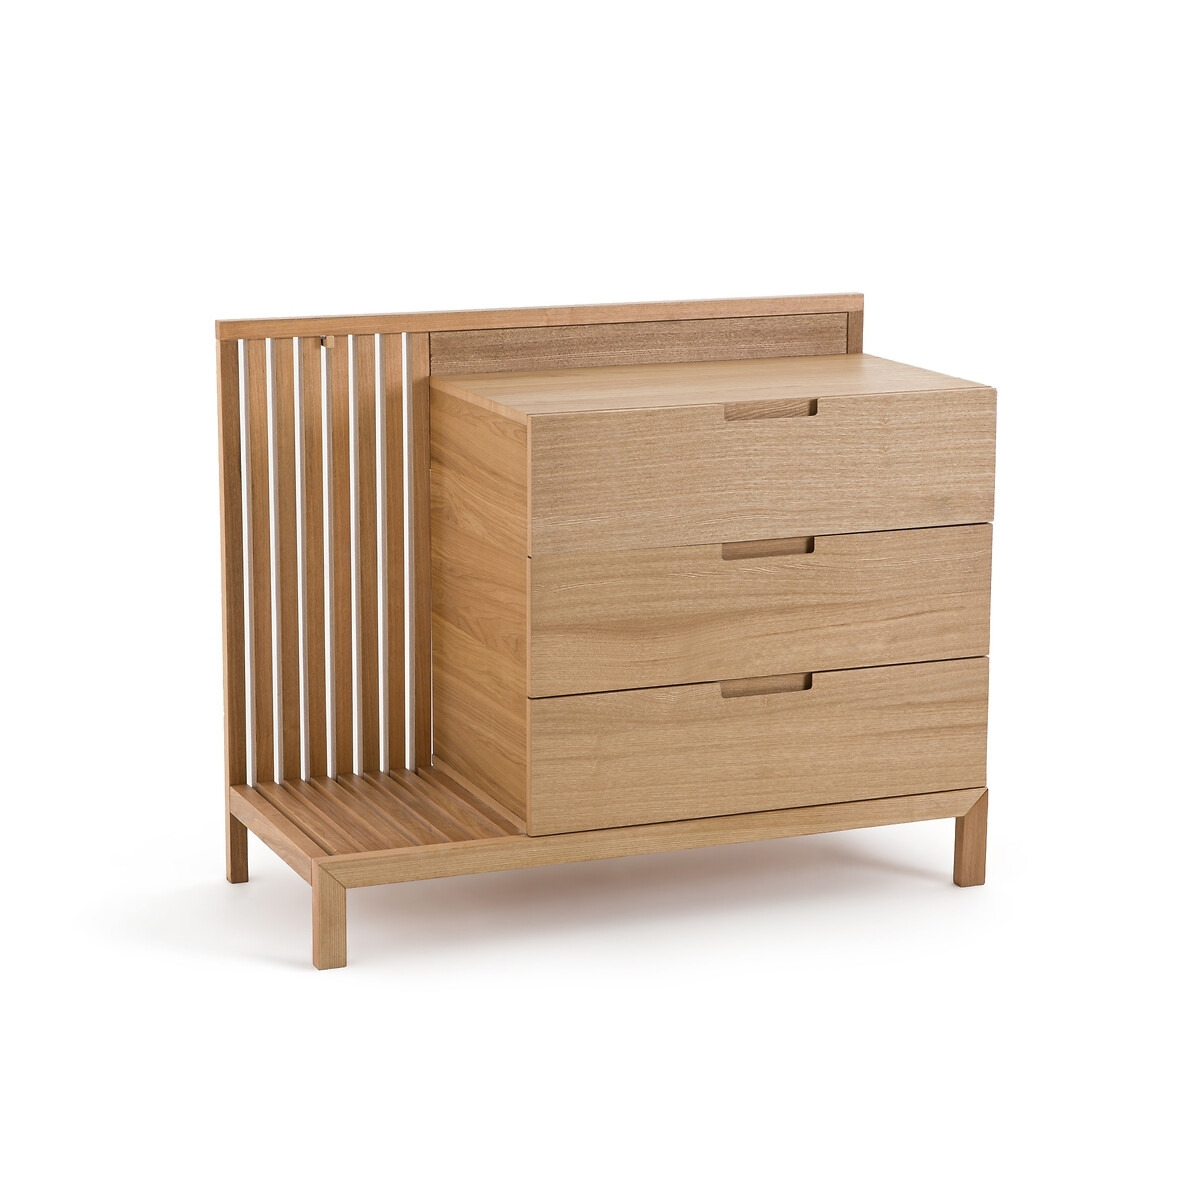 Lazar Ash Chest of 3 Drawers - image 1